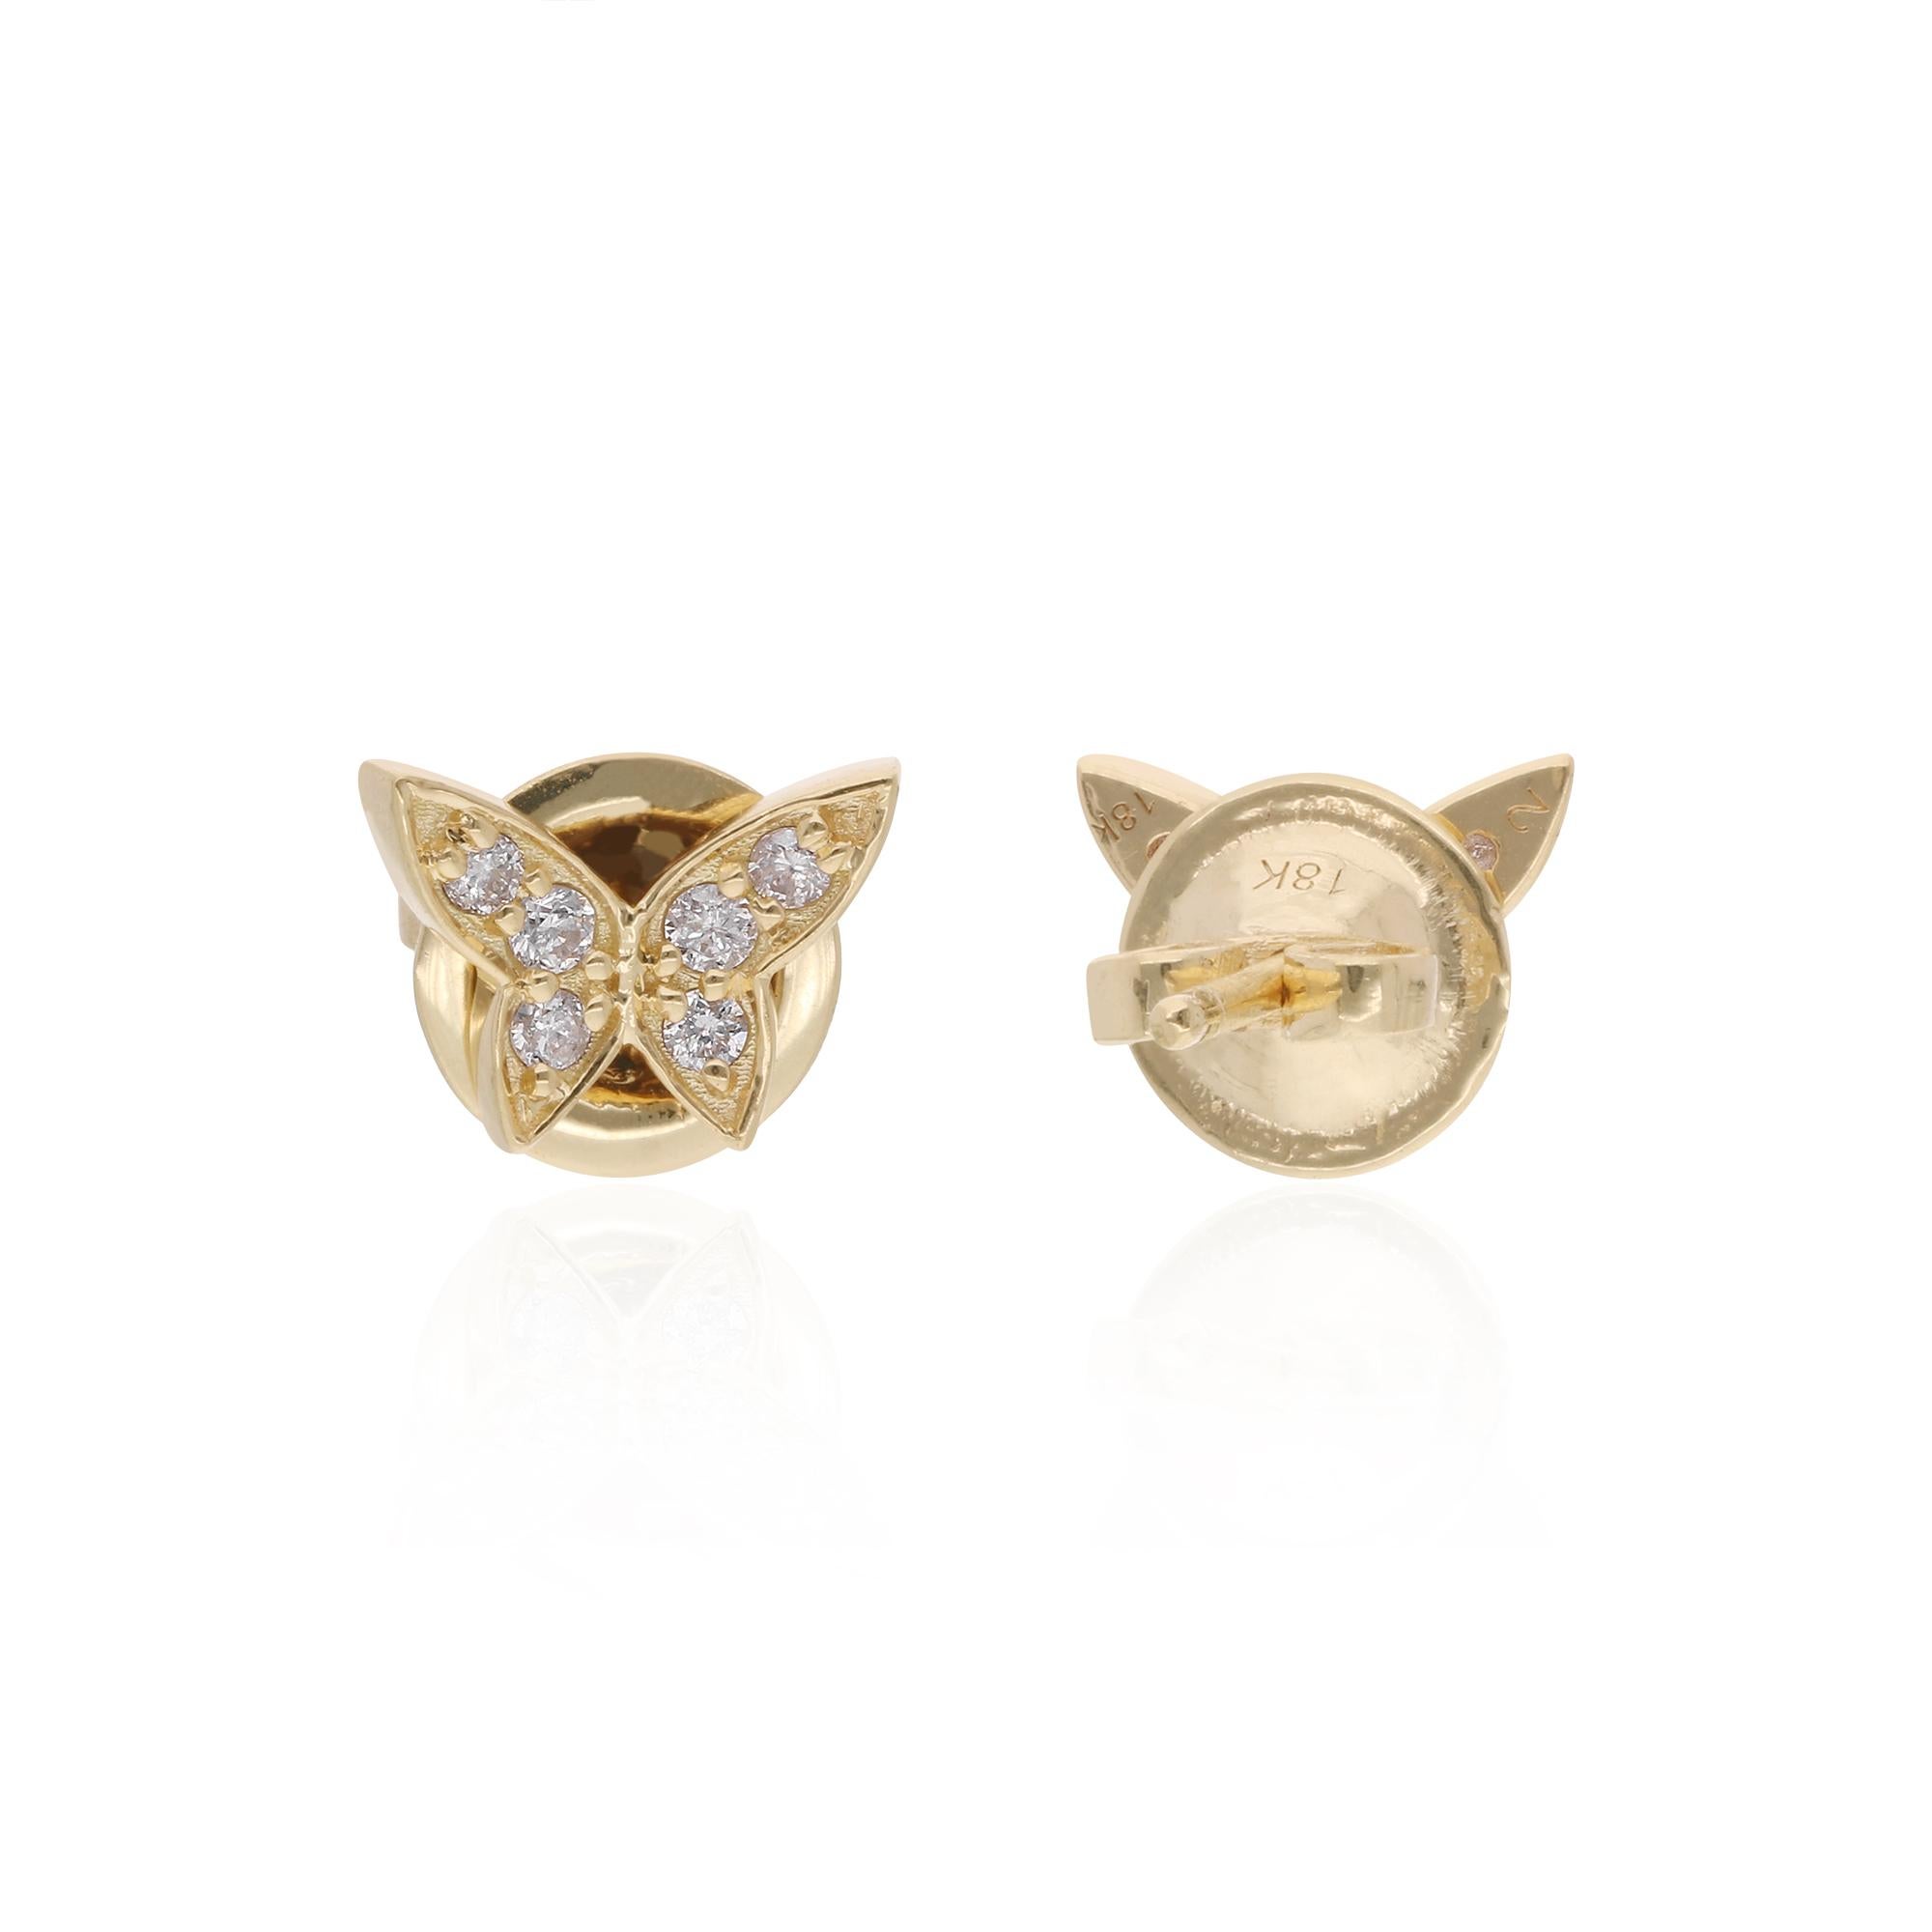 The earrings are typically crafted in 18 karat yellow gold, which provides a warm and vibrant backdrop for the diamond and complements the butterfly design. Yellow gold is a popular choice for fine jewelry due to its timeless appeal and